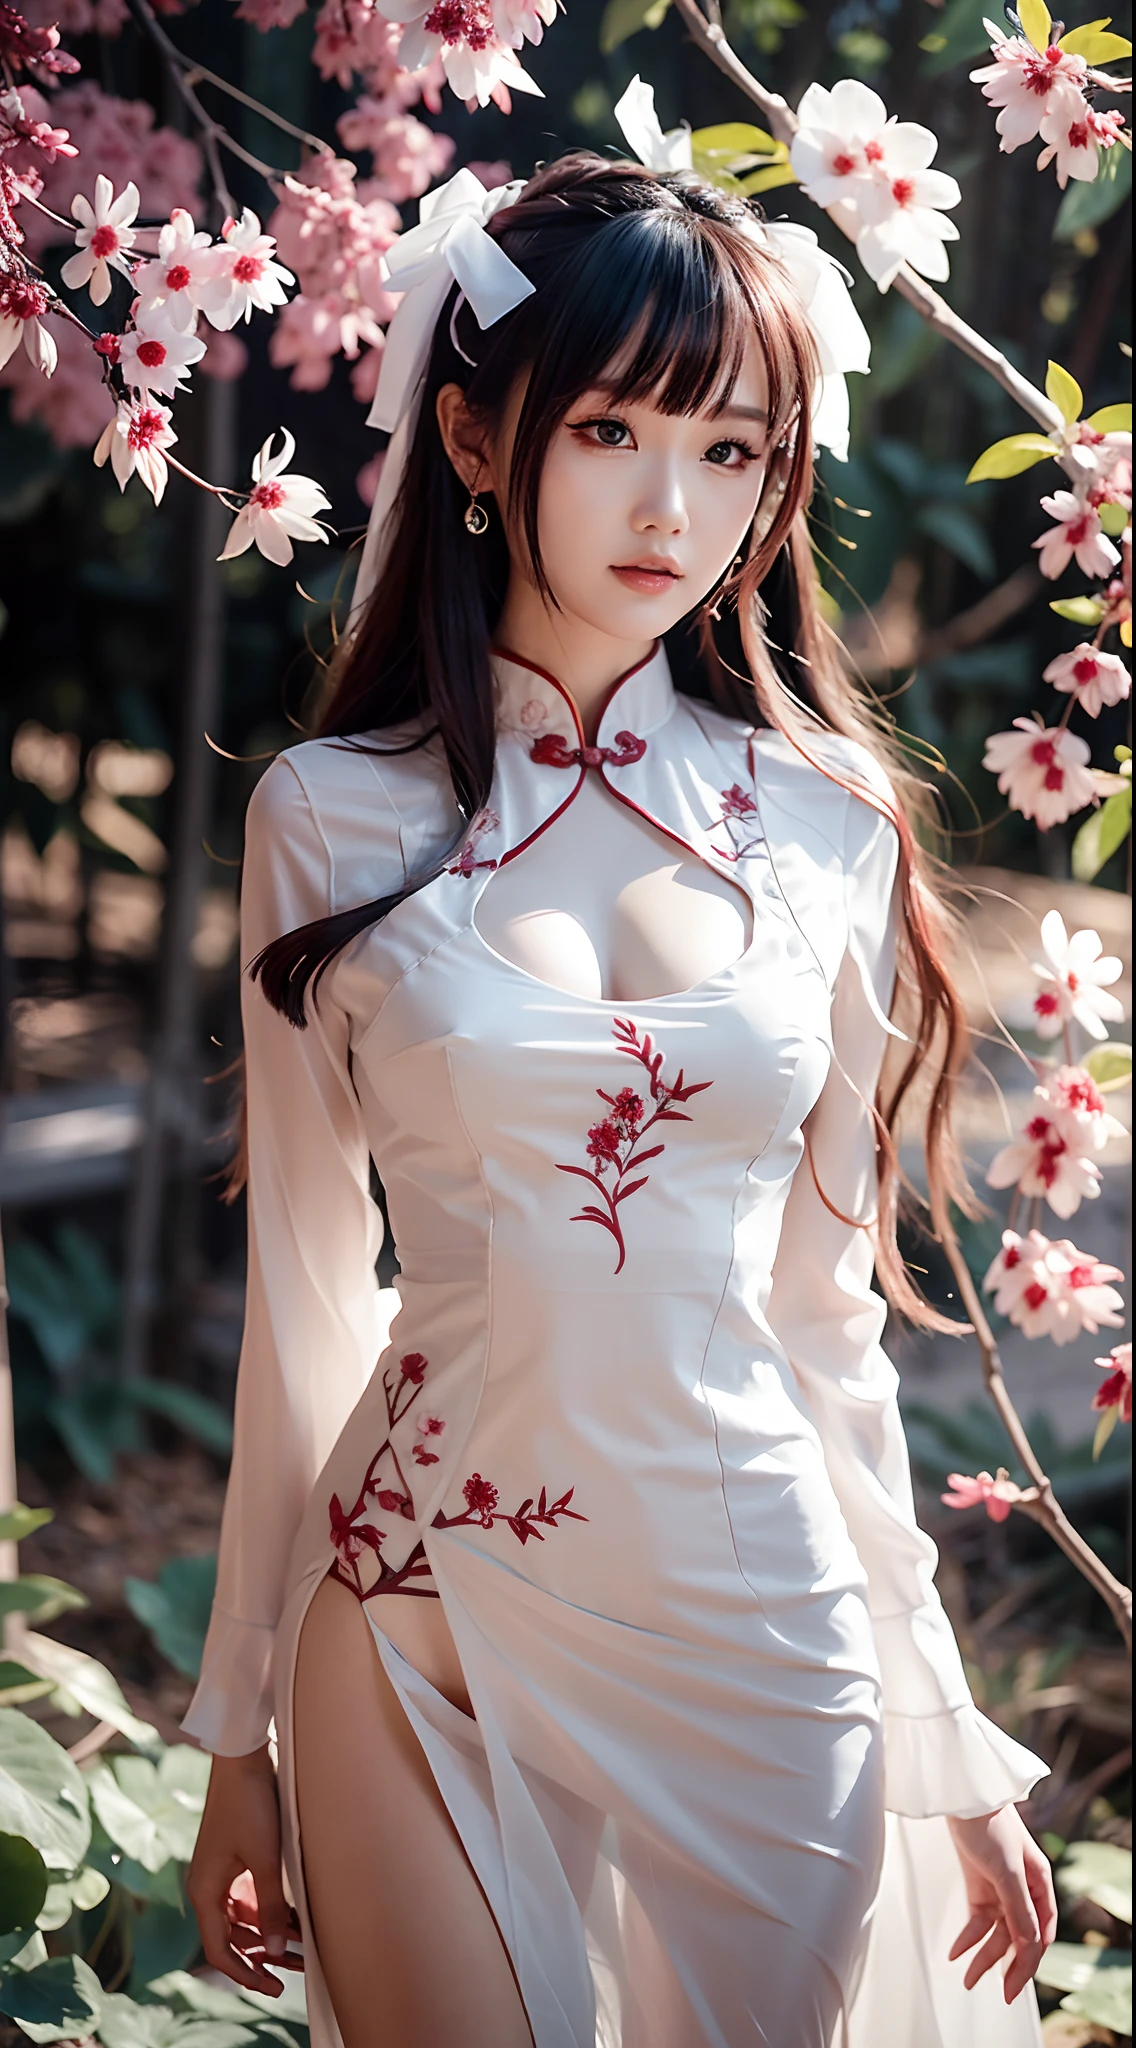 A woman in a dress stands in front of a tree, Ethereal beauty, beautiful female bodies, a stunning young ethereal figure, Cheongsam, Very ethereal, Translucent body, Translucent dress, By Leng Mei, extremely beautiful and ethereal, intricate body, gorgeous chinese models, Oriental fantasy, Incredibly ethereal, flower goddess, Beautiful goddess, ((a beautiful fantasy empress))